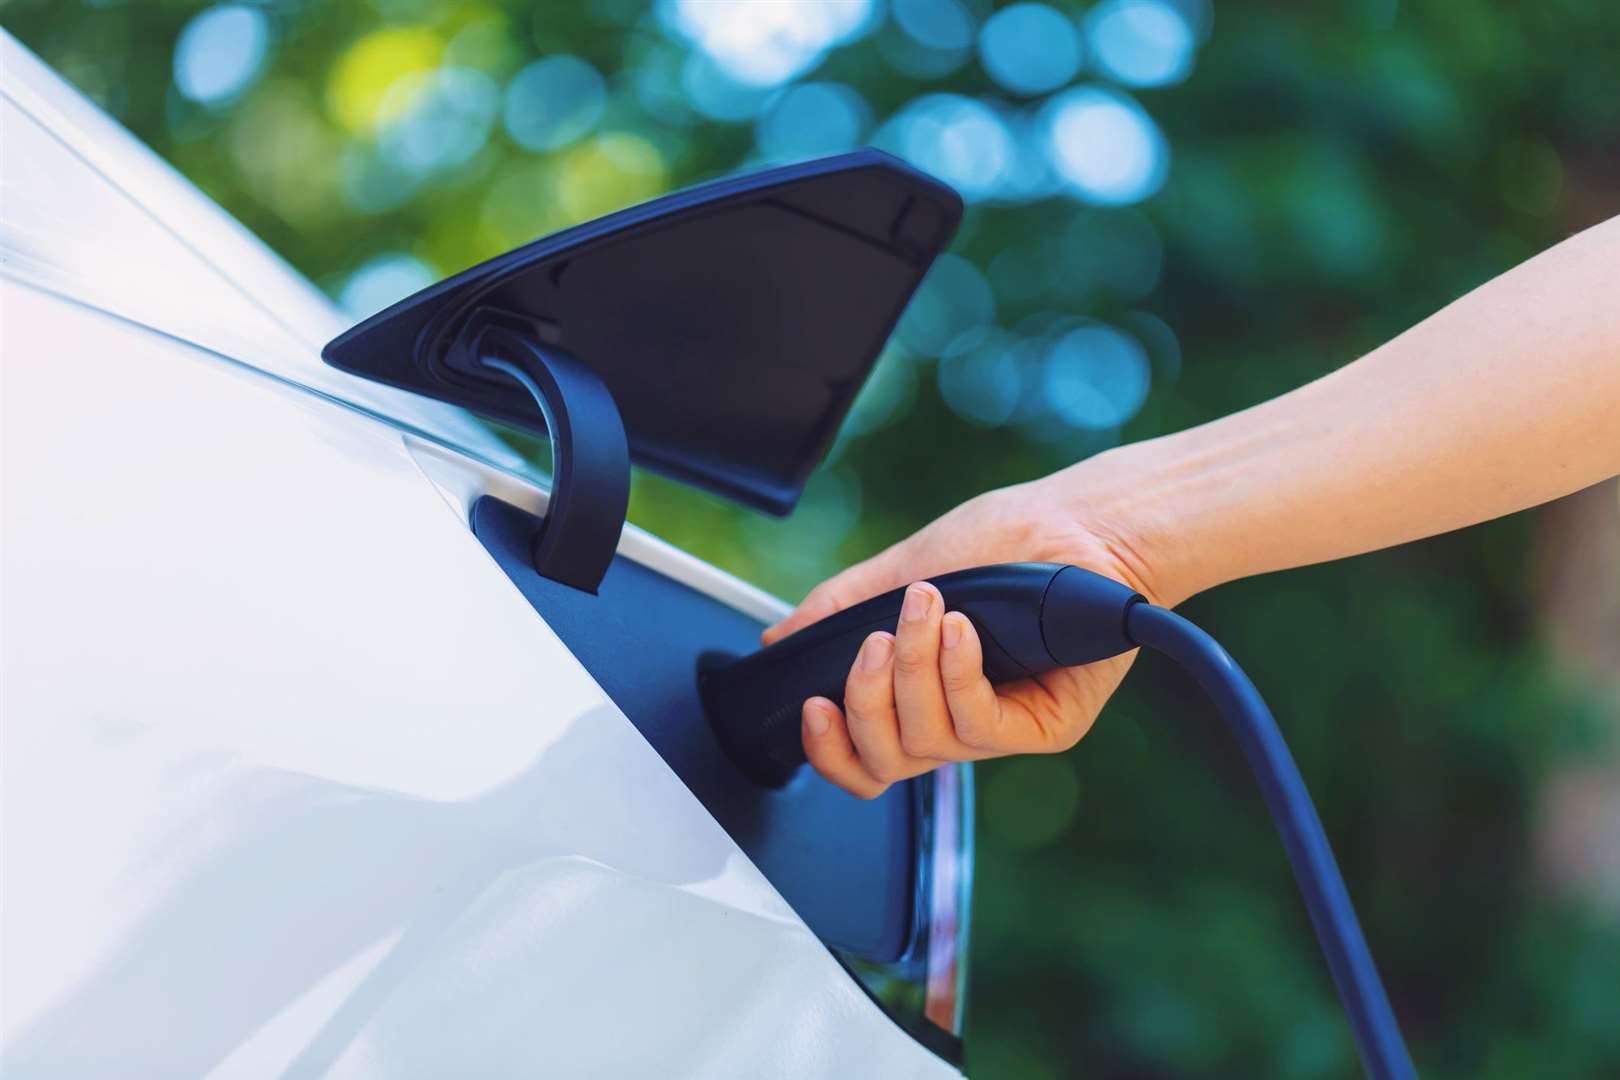 The council could be set to dramatically increase the price of charging electric vehicles.